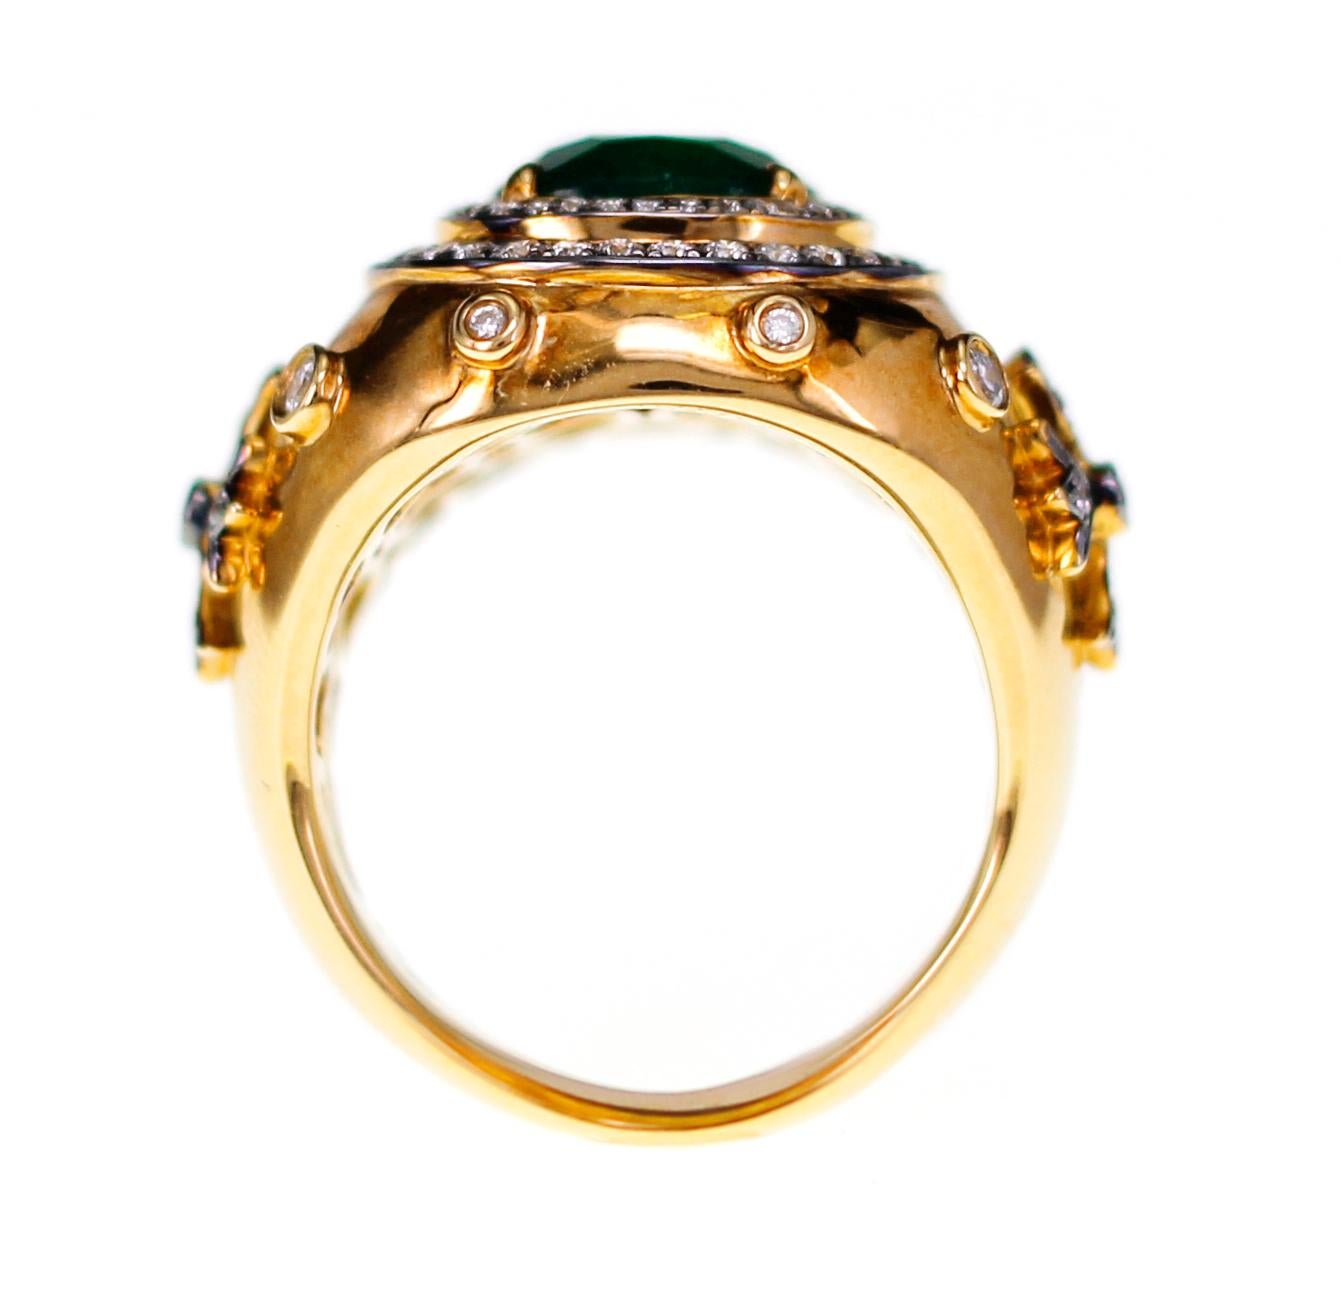 3.19 Carat Vivid Green Zambian Emerald in Antique Style Bridal Ring In New Condition For Sale In Hung Hom, HK